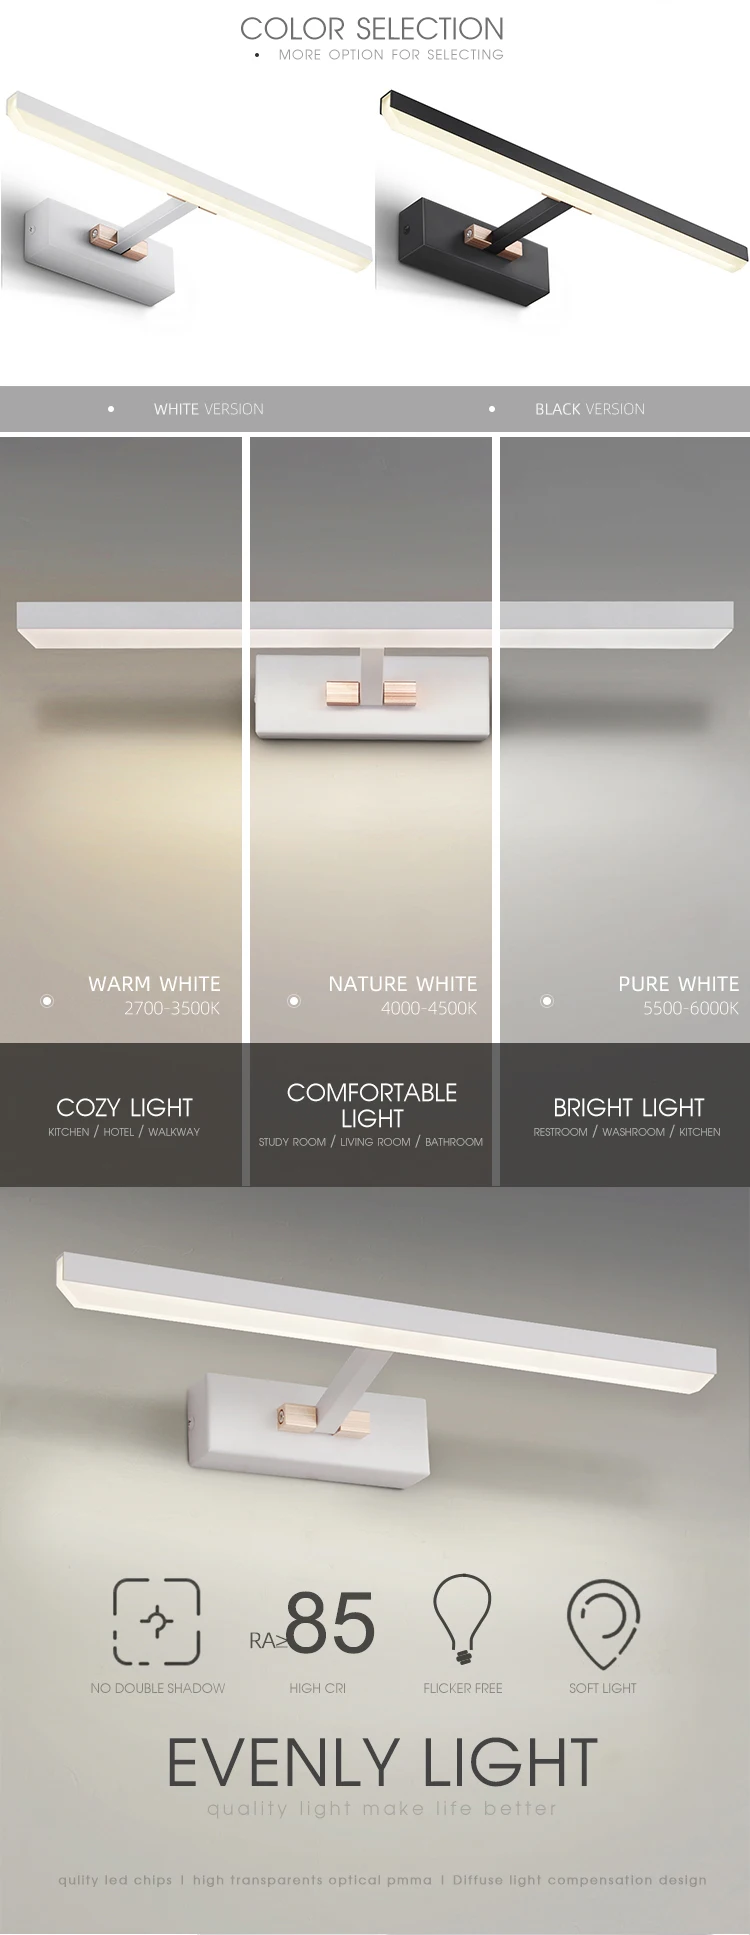 12W mirror light led free rotation nordic led lamp for mirror surface mount home light led wall light